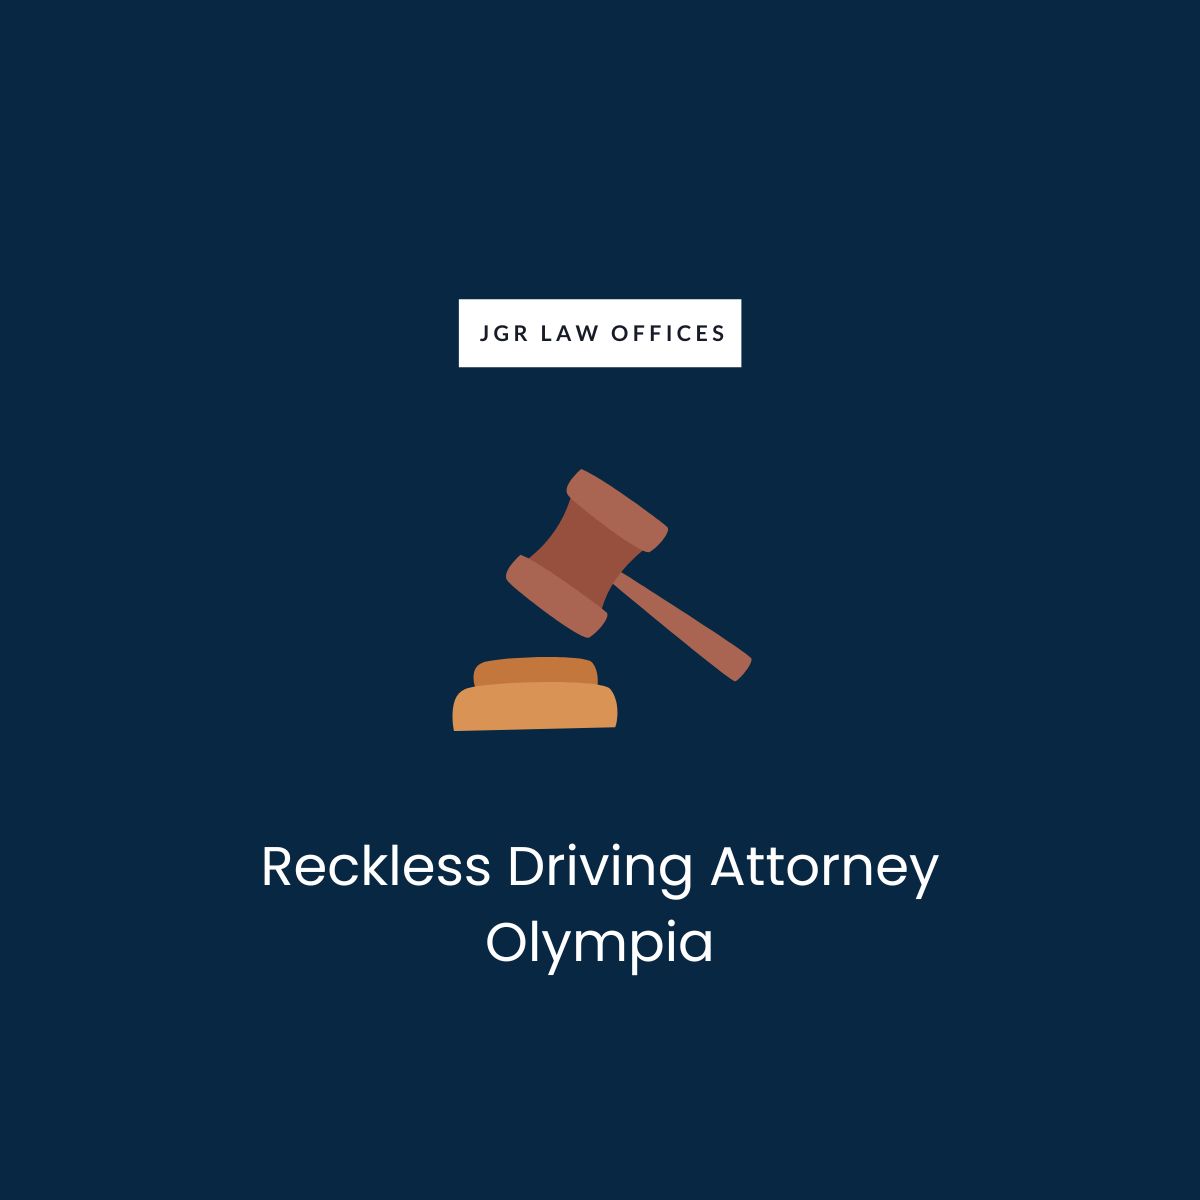 Reckless Driving Attorney Olympia